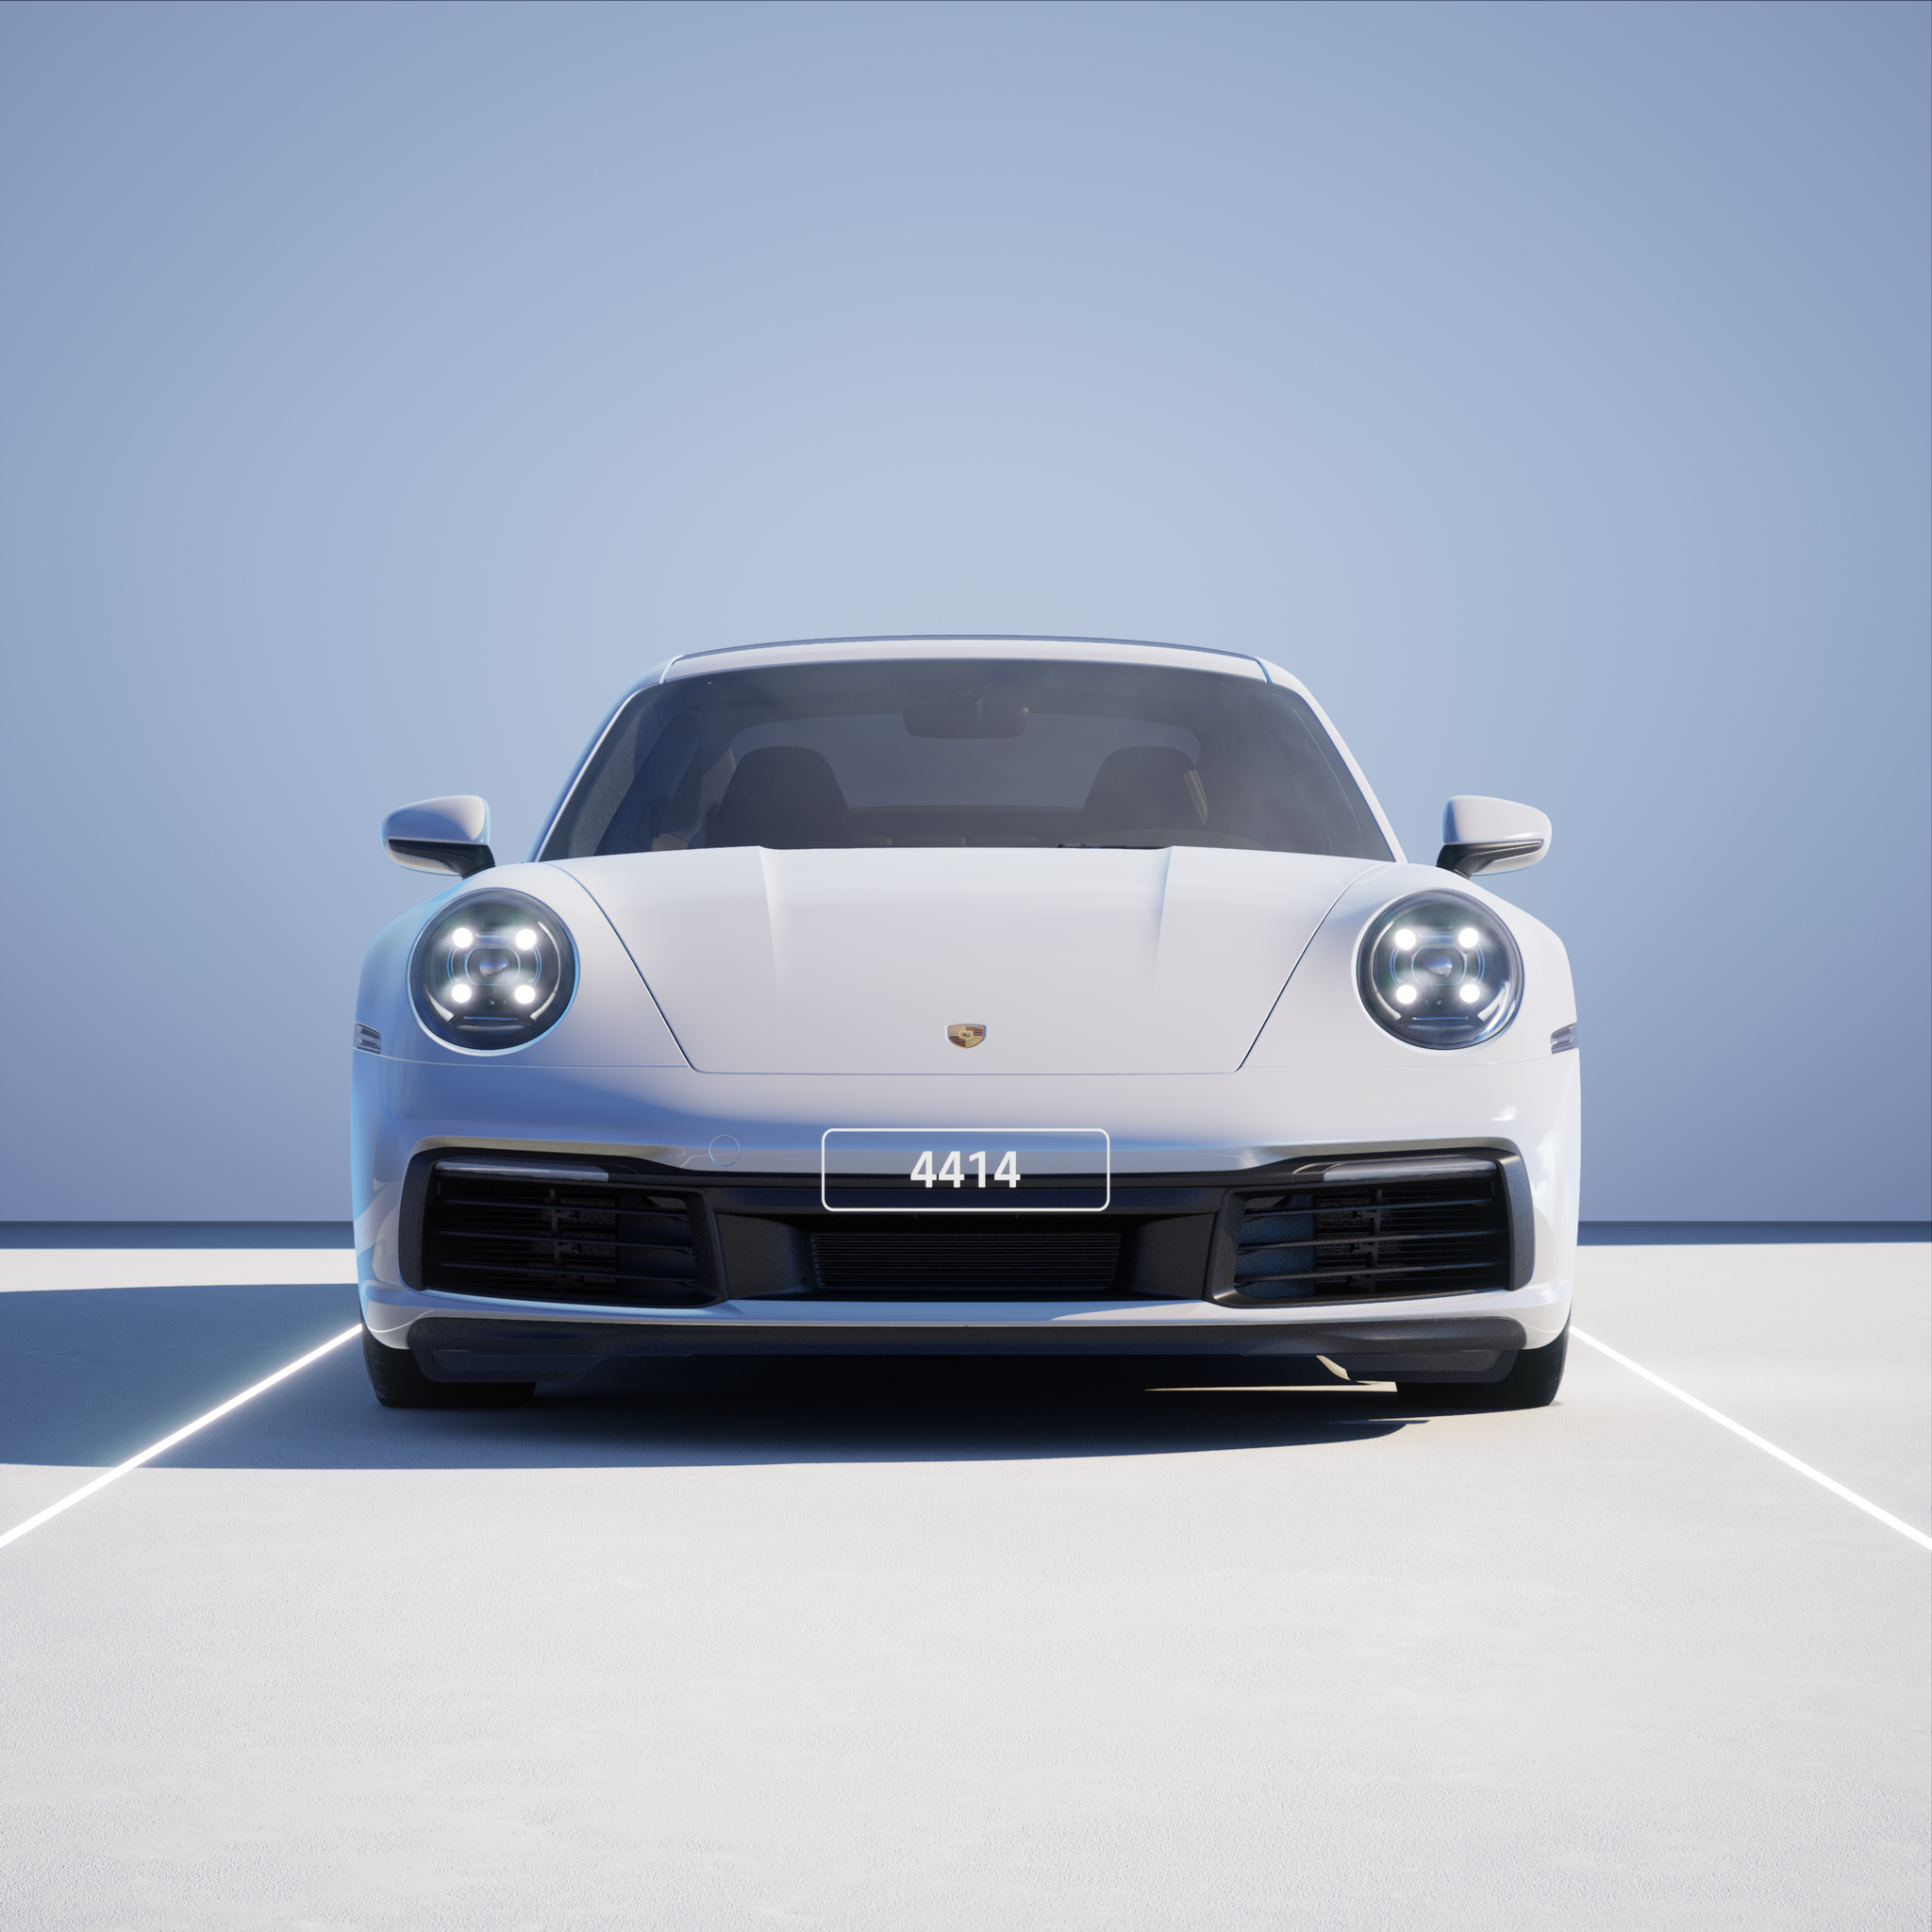 The PORSCHΞ 911 4414 image in phase